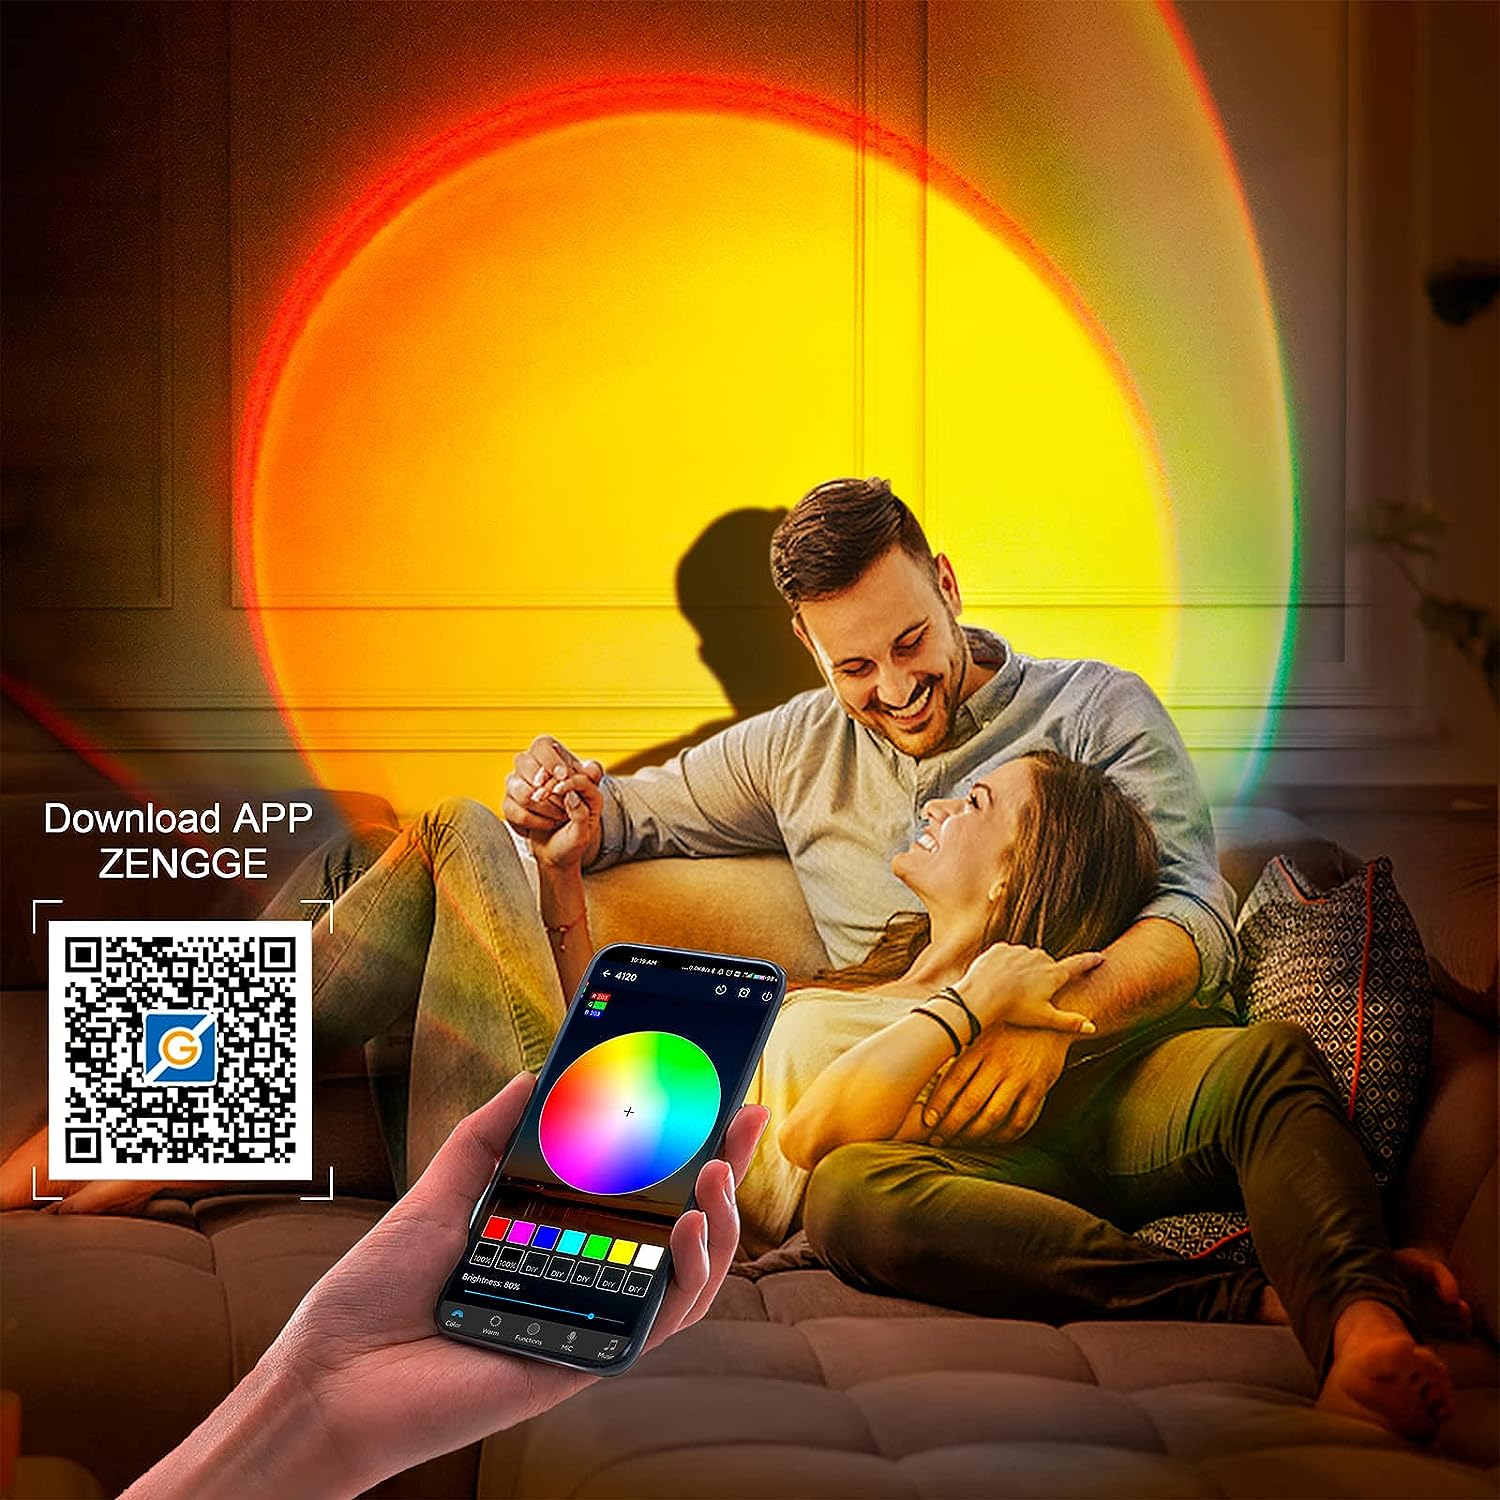 XEBKOR Sunset Lamp Projector Multicolor Changing LED Sunset Projection Lamp,Switch Button and APP Control 360 Degree Rotation Sunlight Lamp for Bedroom, Photography, Party, Tiktok Live, Room Decor